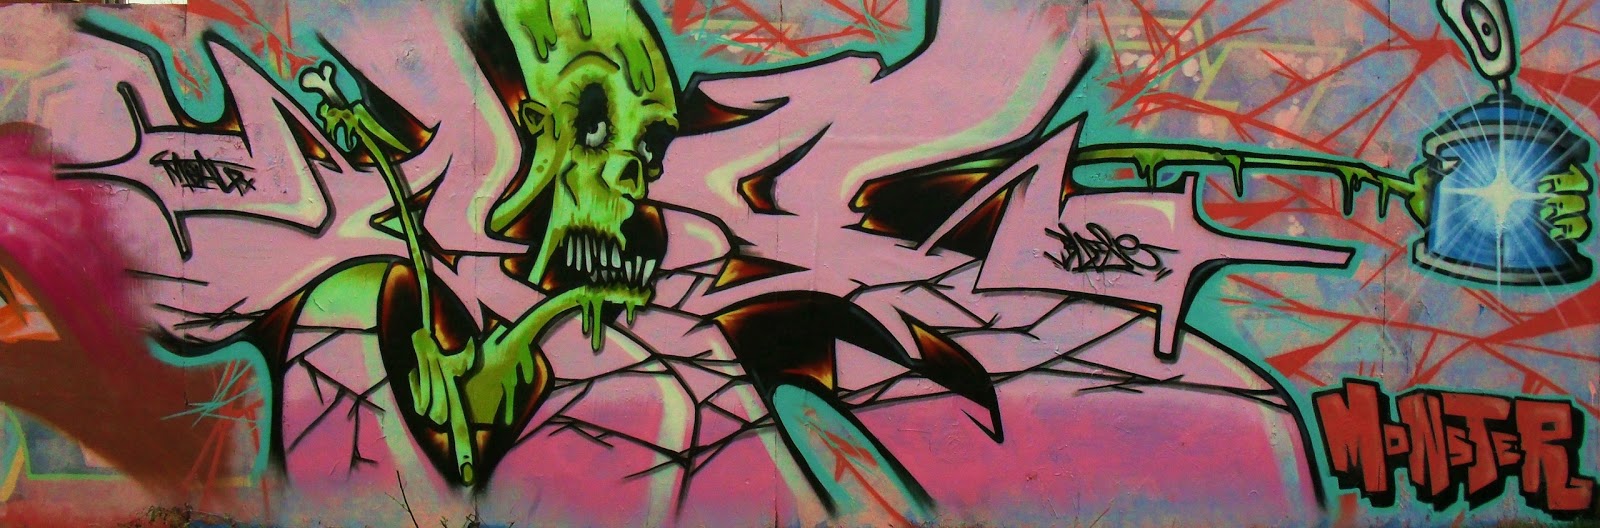 Monster Colors,graffiti Blog,spray paint,cans street art,tags,taggging